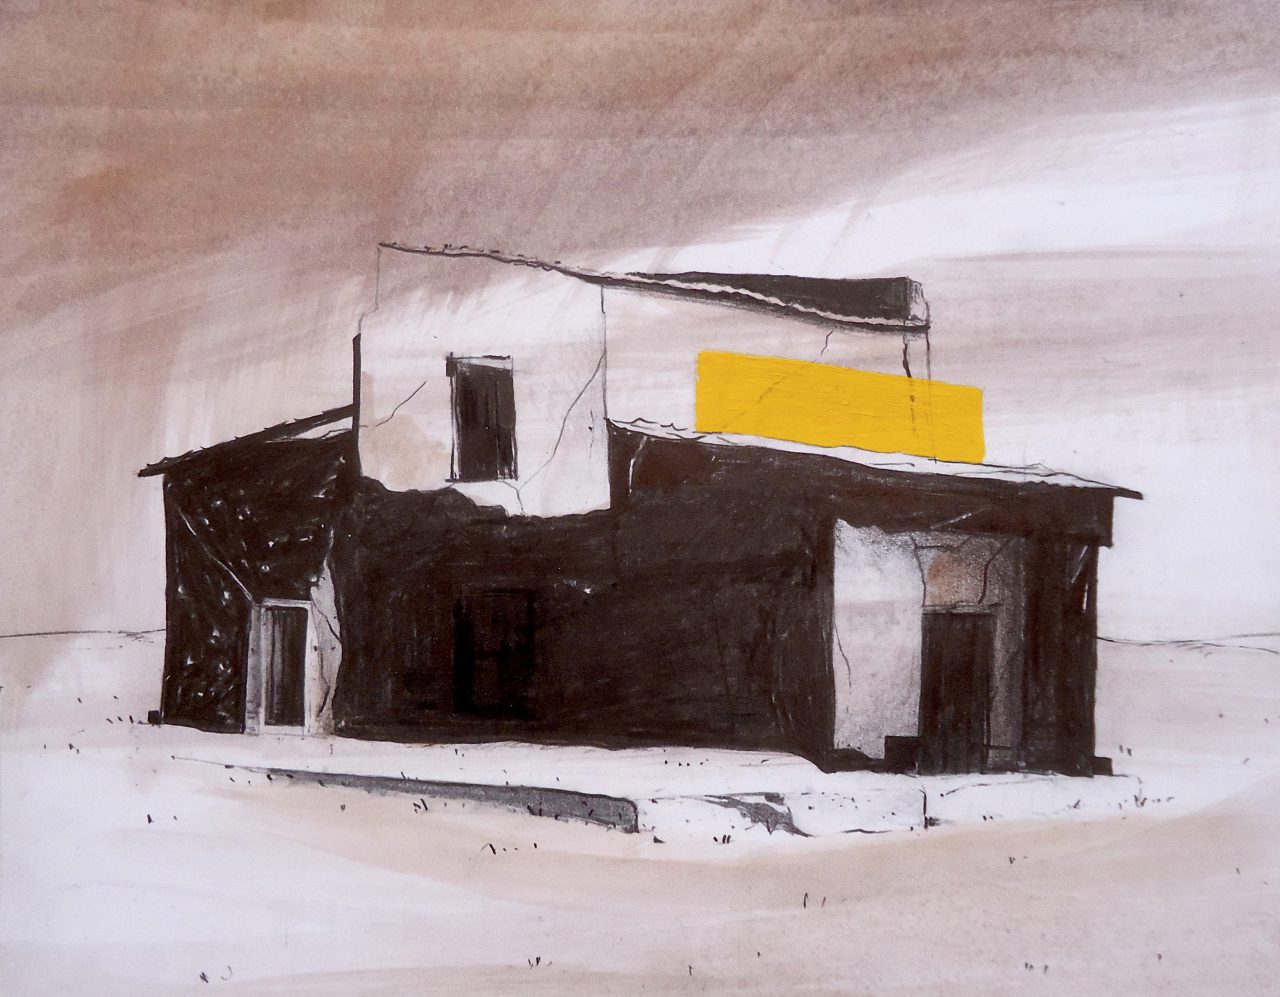 Along the new road #7, 2019, Crayon, pencil and oil on paper, 21 x 27 cm